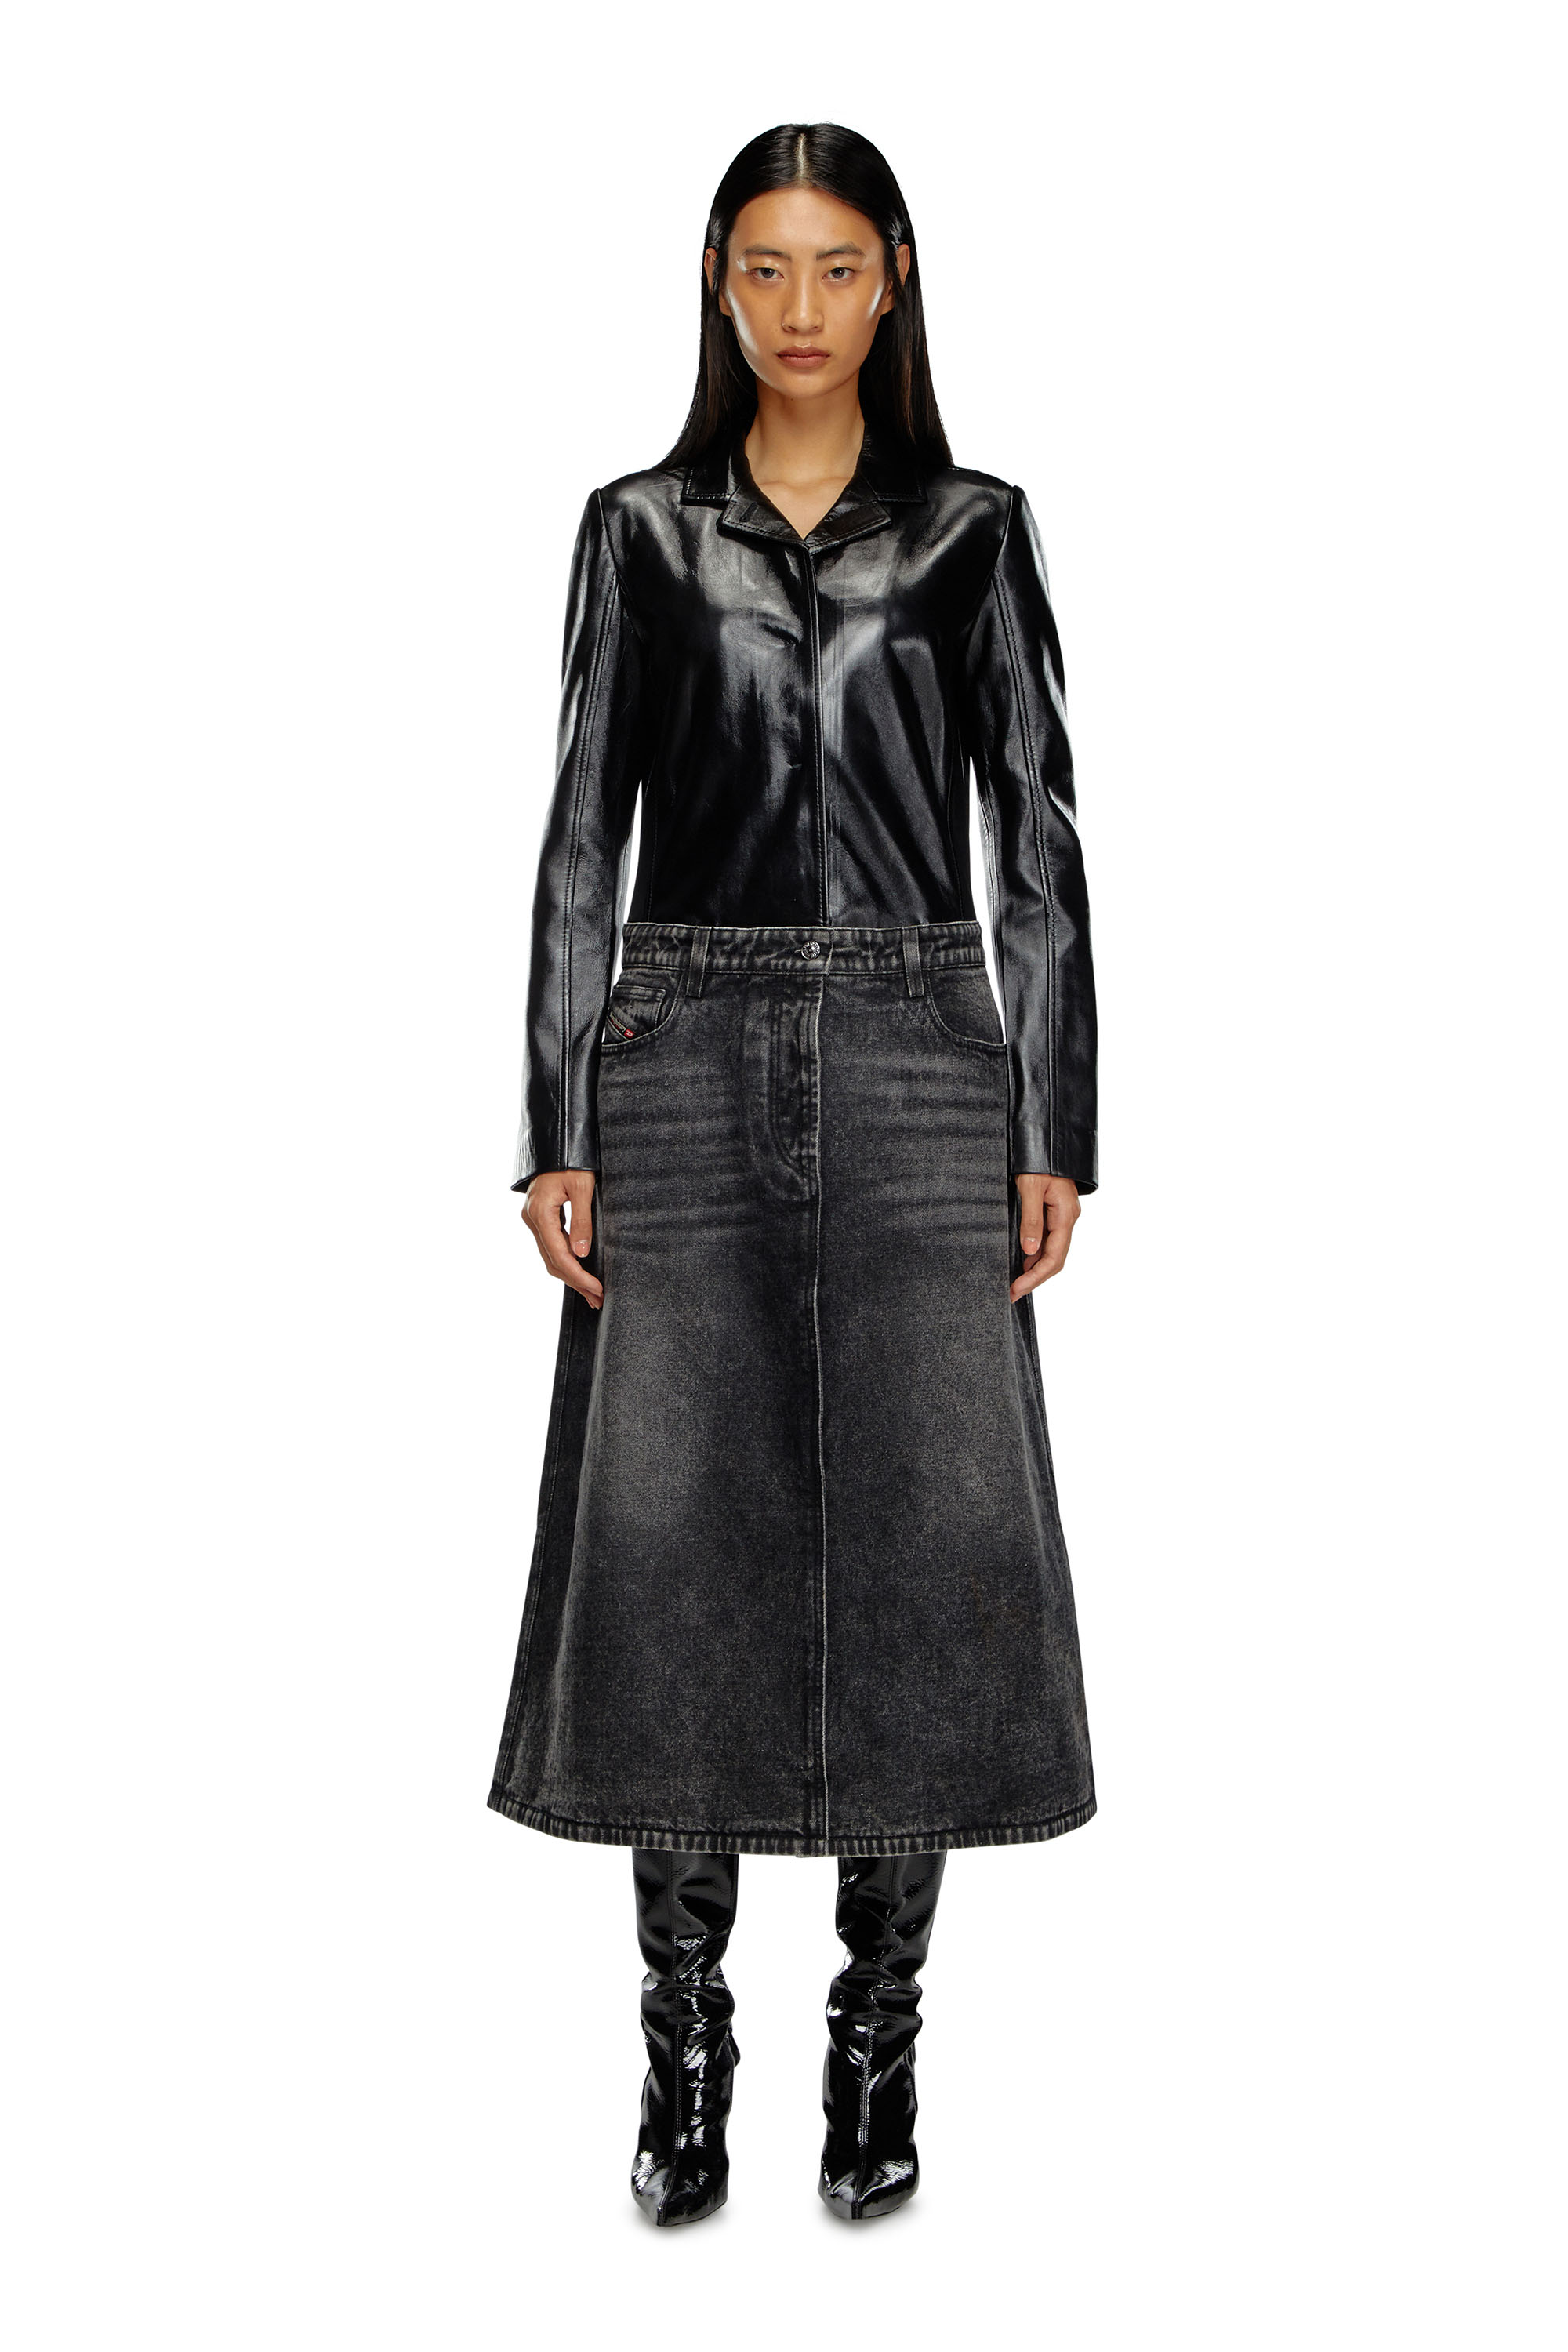 Diesel - L-ORY, Female Hybrid coat in denim and leather in ブラック - Image 2